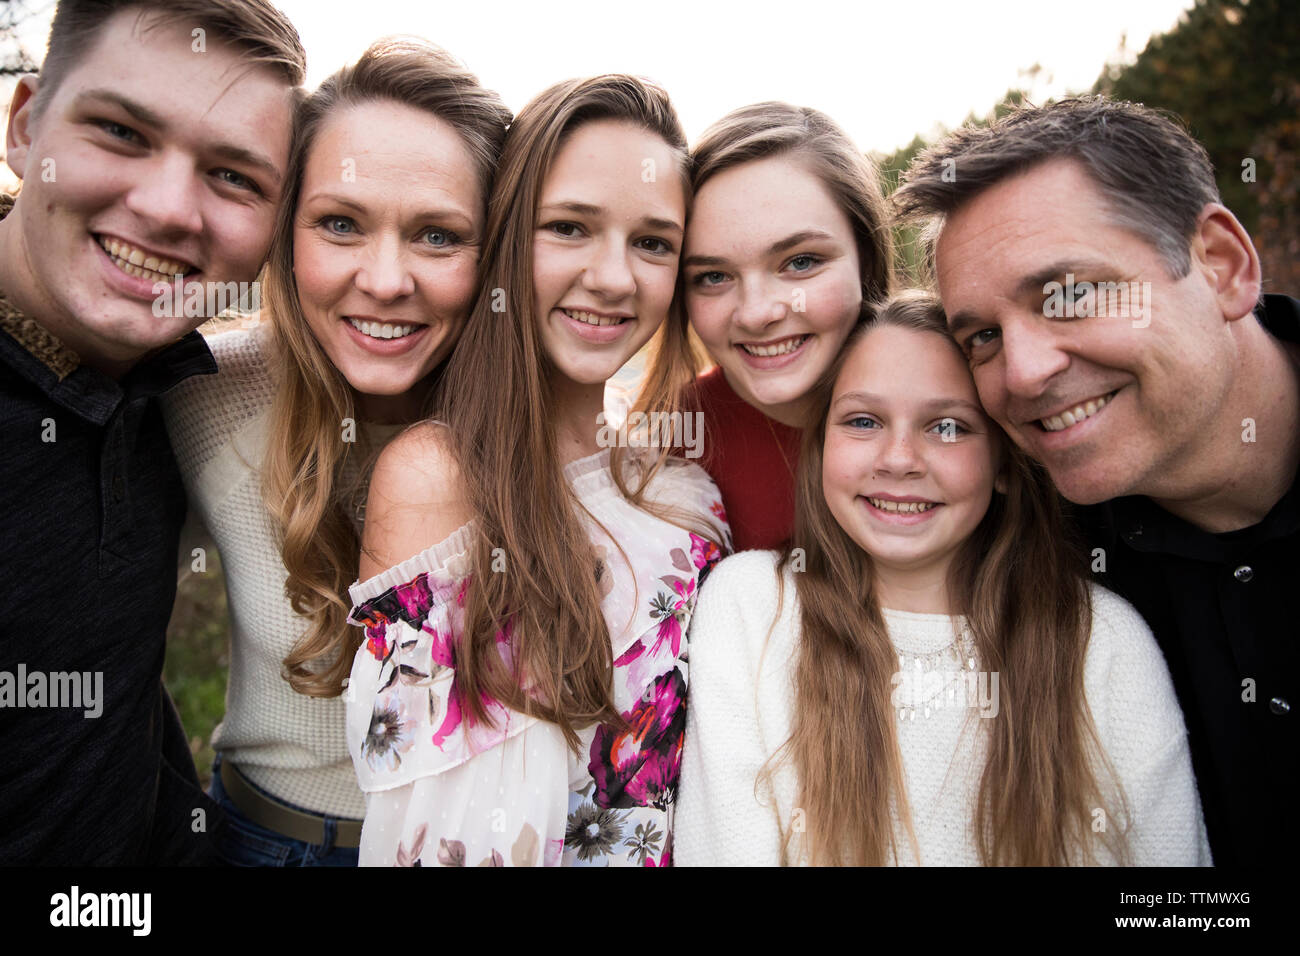 Close View of Faces of Happy Smiling Large Family of Teenagers Stock Photo